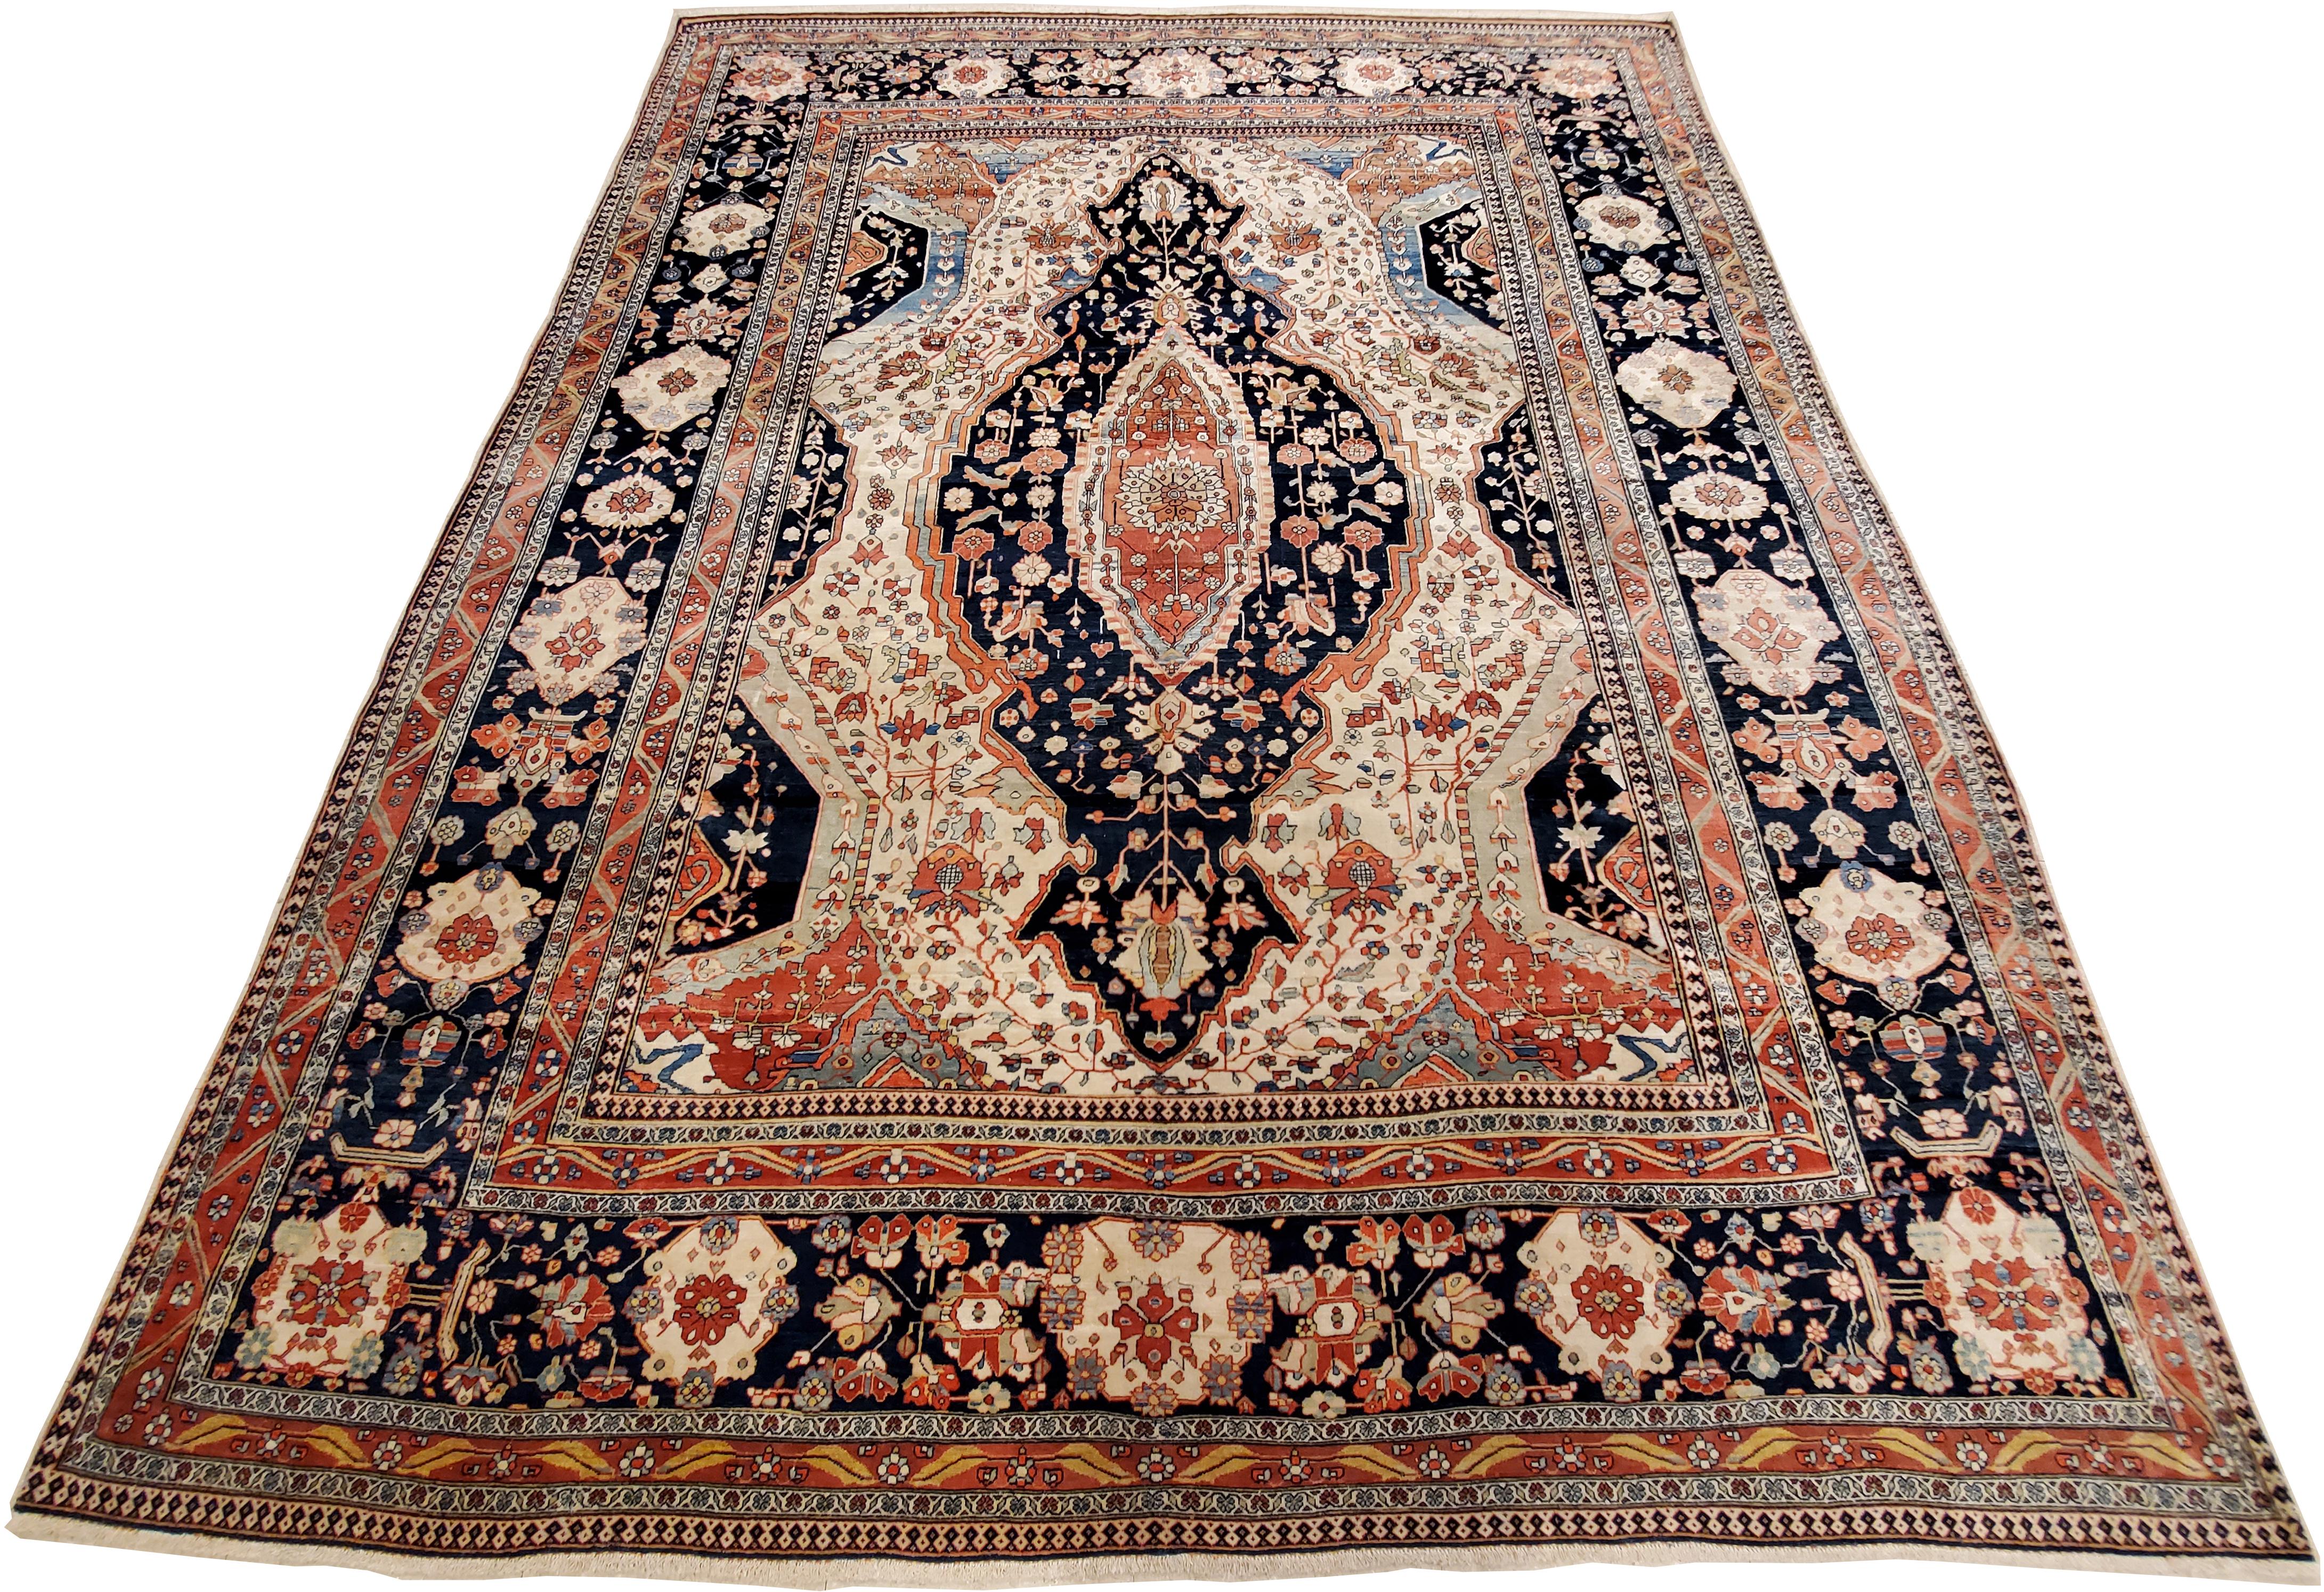 Hand-Knotted Antique Persian Mohtasham Kashan Carpet, Traditional, Ivory, Blue, Green, Reds